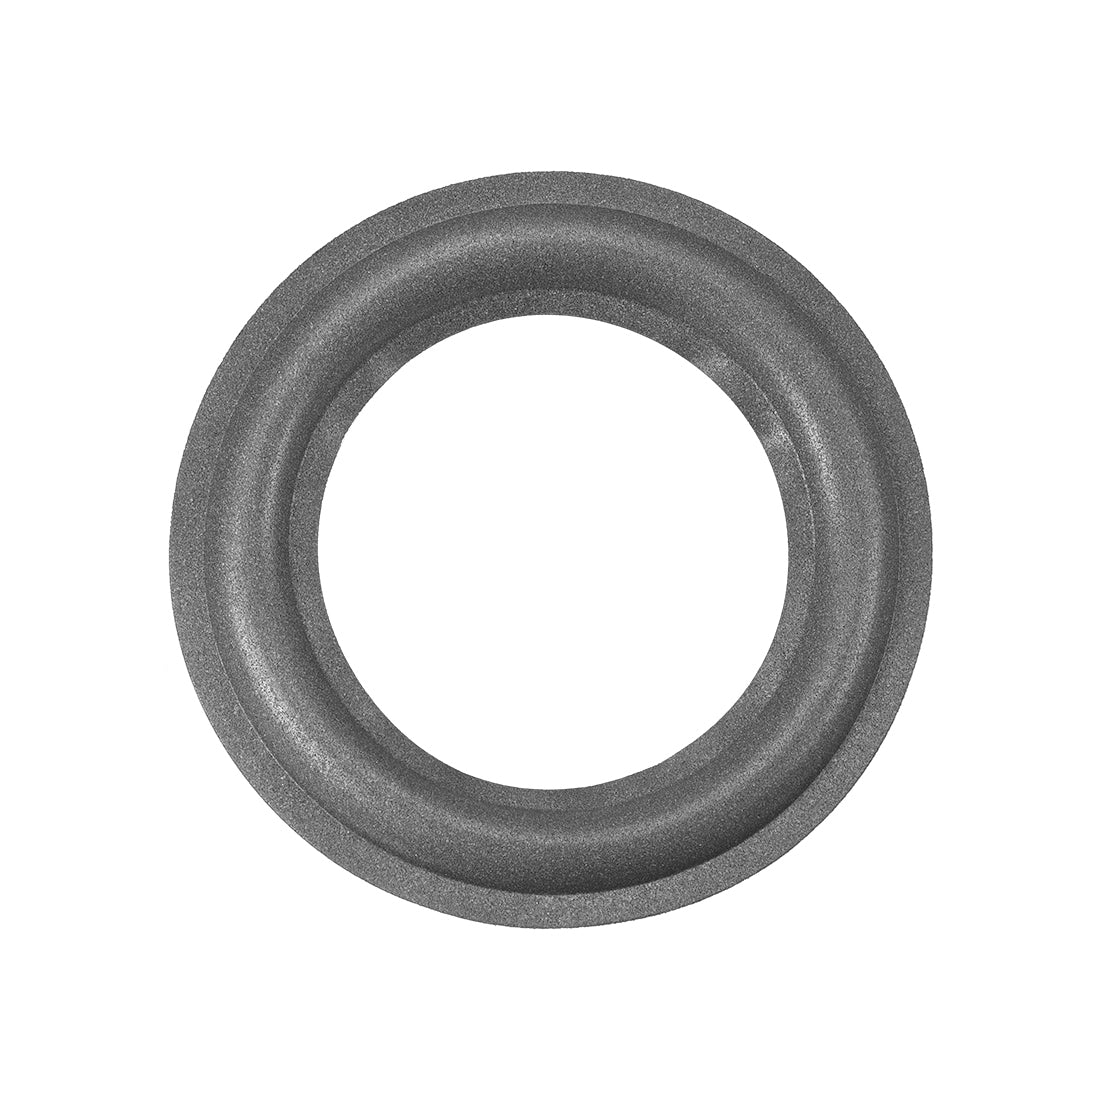 uxcell Uxcell 4.5 inch Speaker Foam Edge Surround Rings Replacement Parts for Speaker